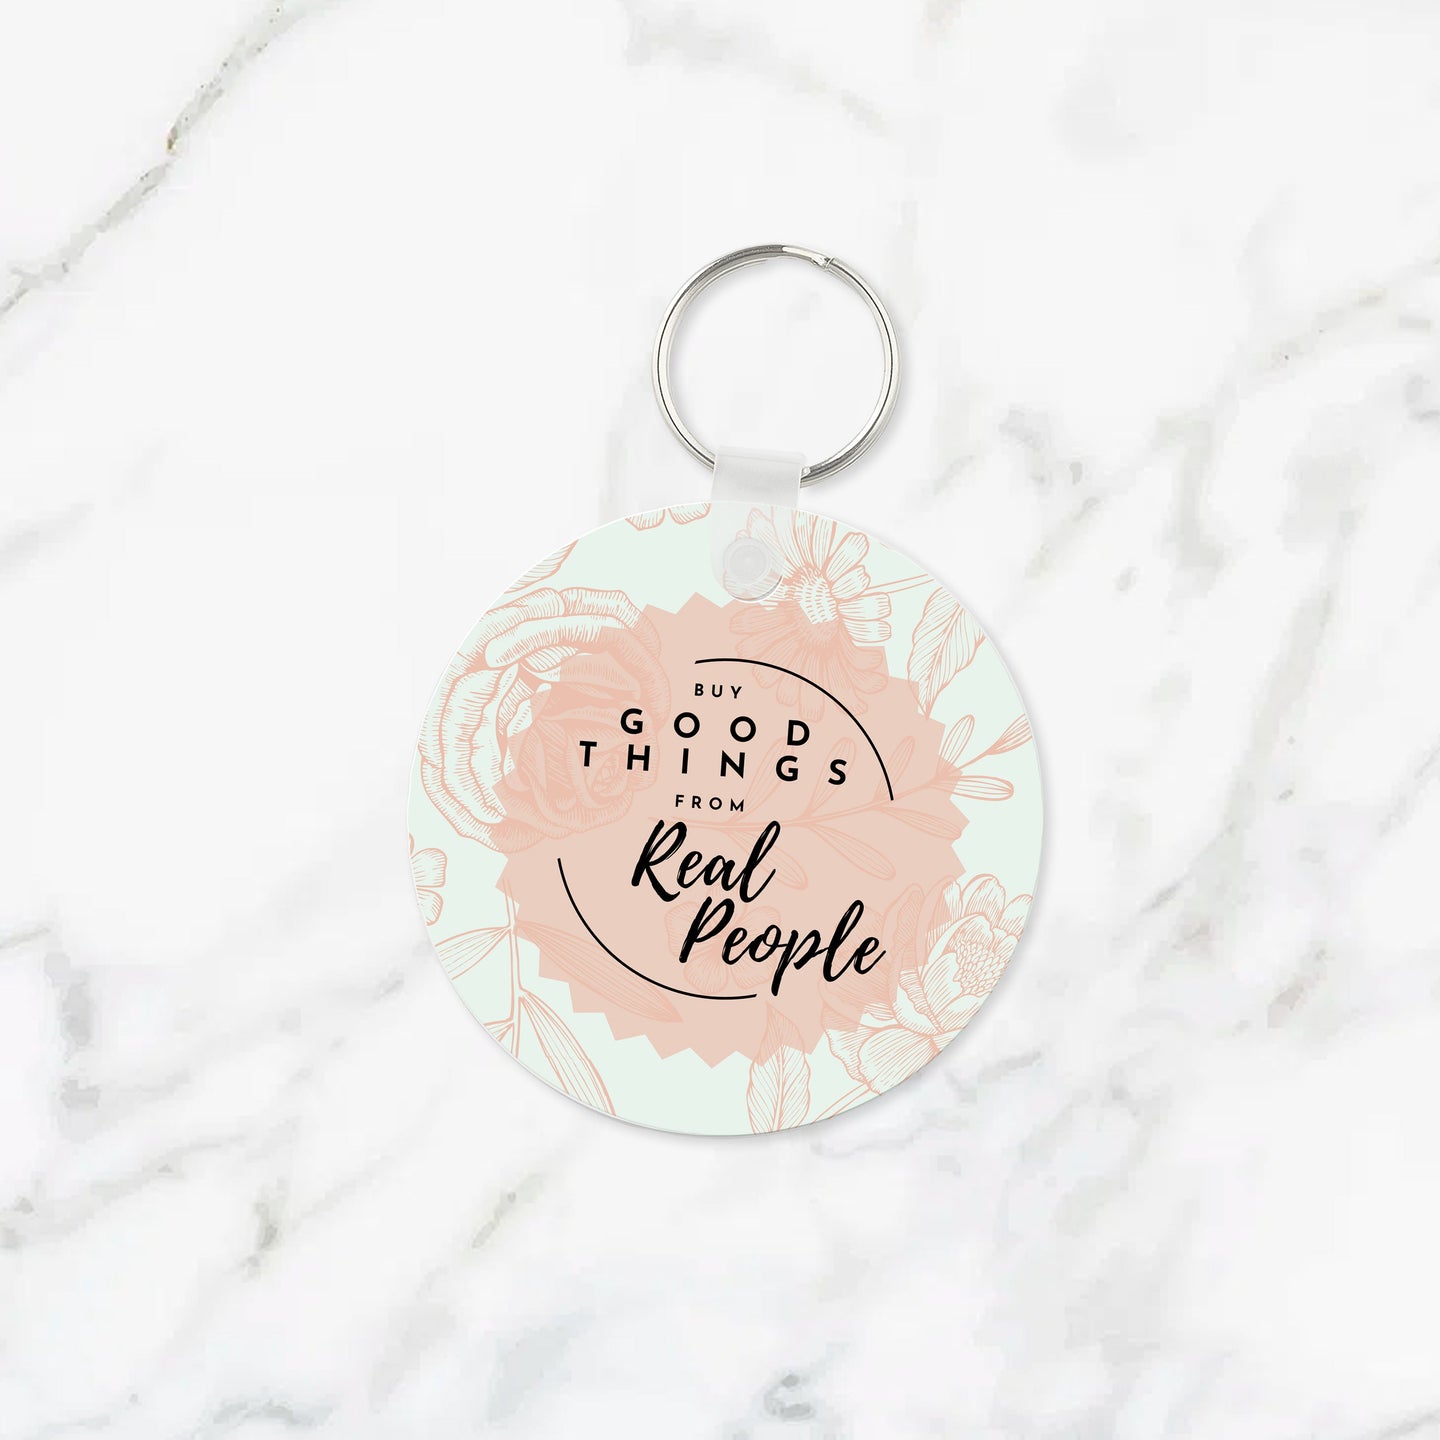 Buy Good Things from Real People Keychain